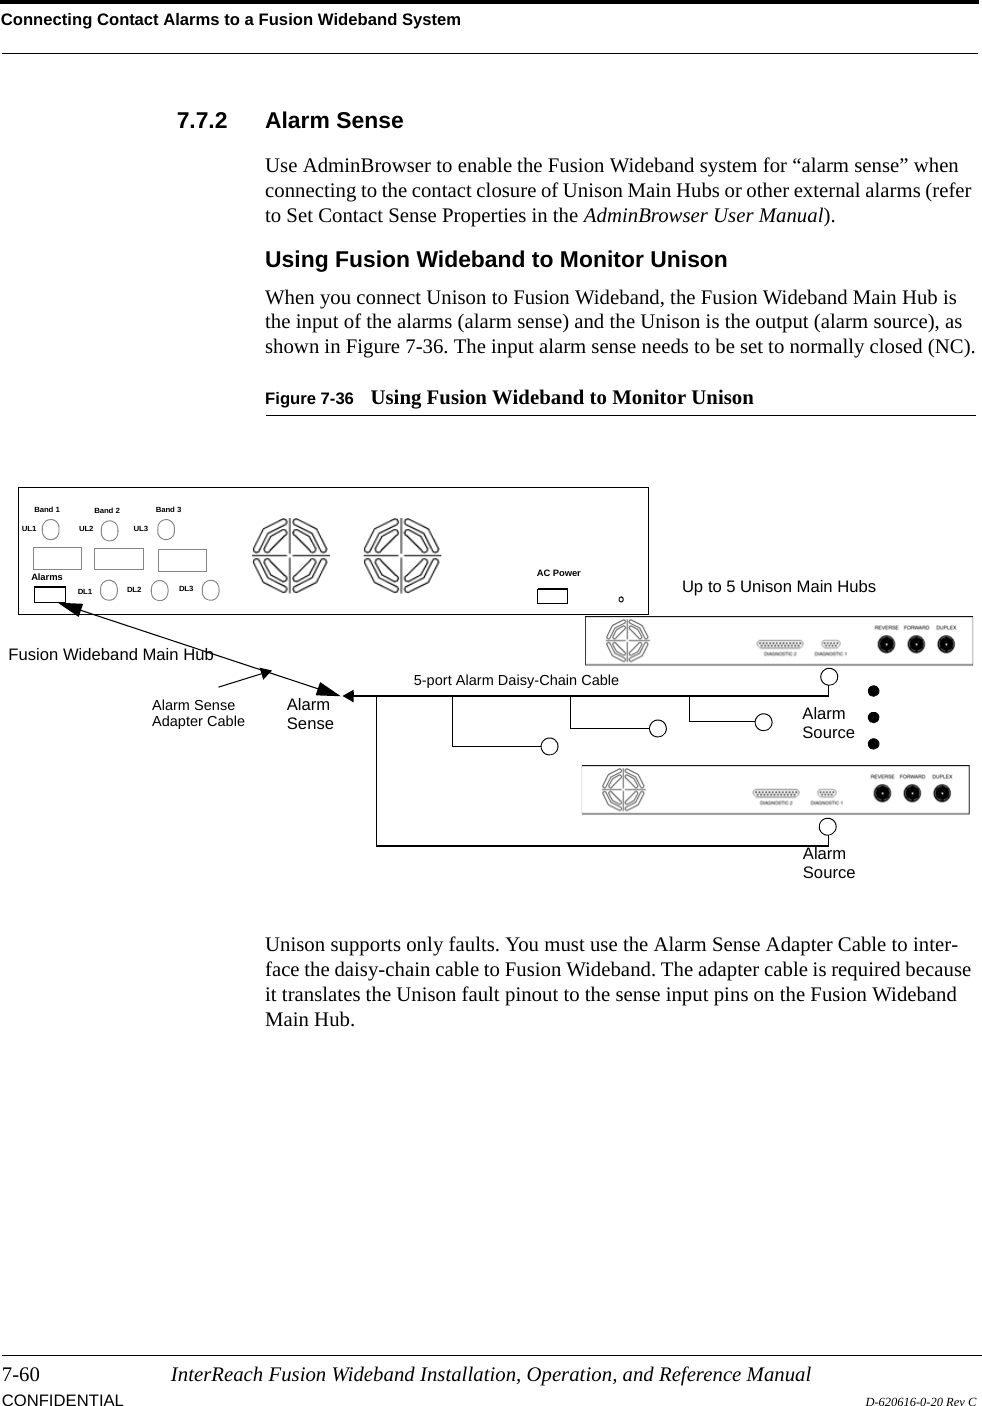 Connecting Contact Alarms to a Fusion Wideband System7-60 InterReach Fusion Wideband Installation, Operation, and Reference ManualCONFIDENTIAL D-620616-0-20 Rev C7.7.2 Alarm SenseUse AdminBrowser to enable the Fusion Wideband system for “alarm sense” when connecting to the contact closure of Unison Main Hubs or other external alarms (refer to Set Contact Sense Properties in the AdminBrowser User Manual).Using Fusion Wideband to Monitor UnisonWhen you connect Unison to Fusion Wideband, the Fusion Wideband Main Hub is the input of the alarms (alarm sense) and the Unison is the output (alarm source), as shown in Figure 7-36. The input alarm sense needs to be set to normally closed (NC).Figure 7-36 Using Fusion Wideband to Monitor UnisonUnison supports only faults. You must use the Alarm Sense Adapter Cable to inter-face the daisy-chain cable to Fusion Wideband. The adapter cable is required because it translates the Unison fault pinout to the sense input pins on the Fusion Wideband Main Hub.Up to 5 Unison Main HubsFusion Wideband Main HubAlarmSourceAlarmSense AlarmSourceAlarm SenseAdapter Cable5-port Alarm Daisy-Chain CableBand 1 Band 2 Band 3UL1 UL2 UL3DL1 DL2 DL3AC PowerAlarms